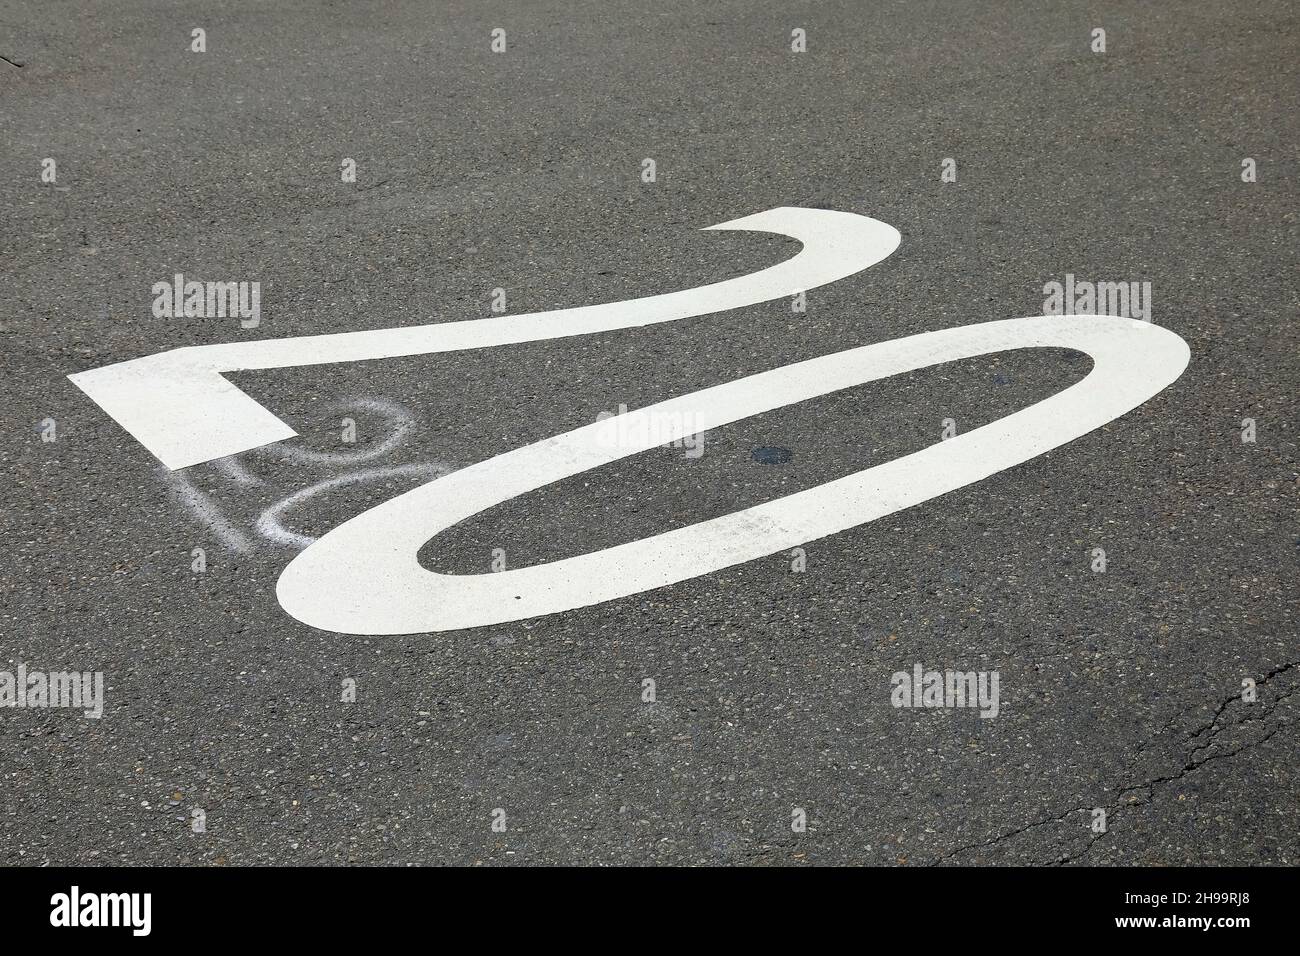 A speed limit of 20 kilometers per hour is visible on the road surface. Stock Photo